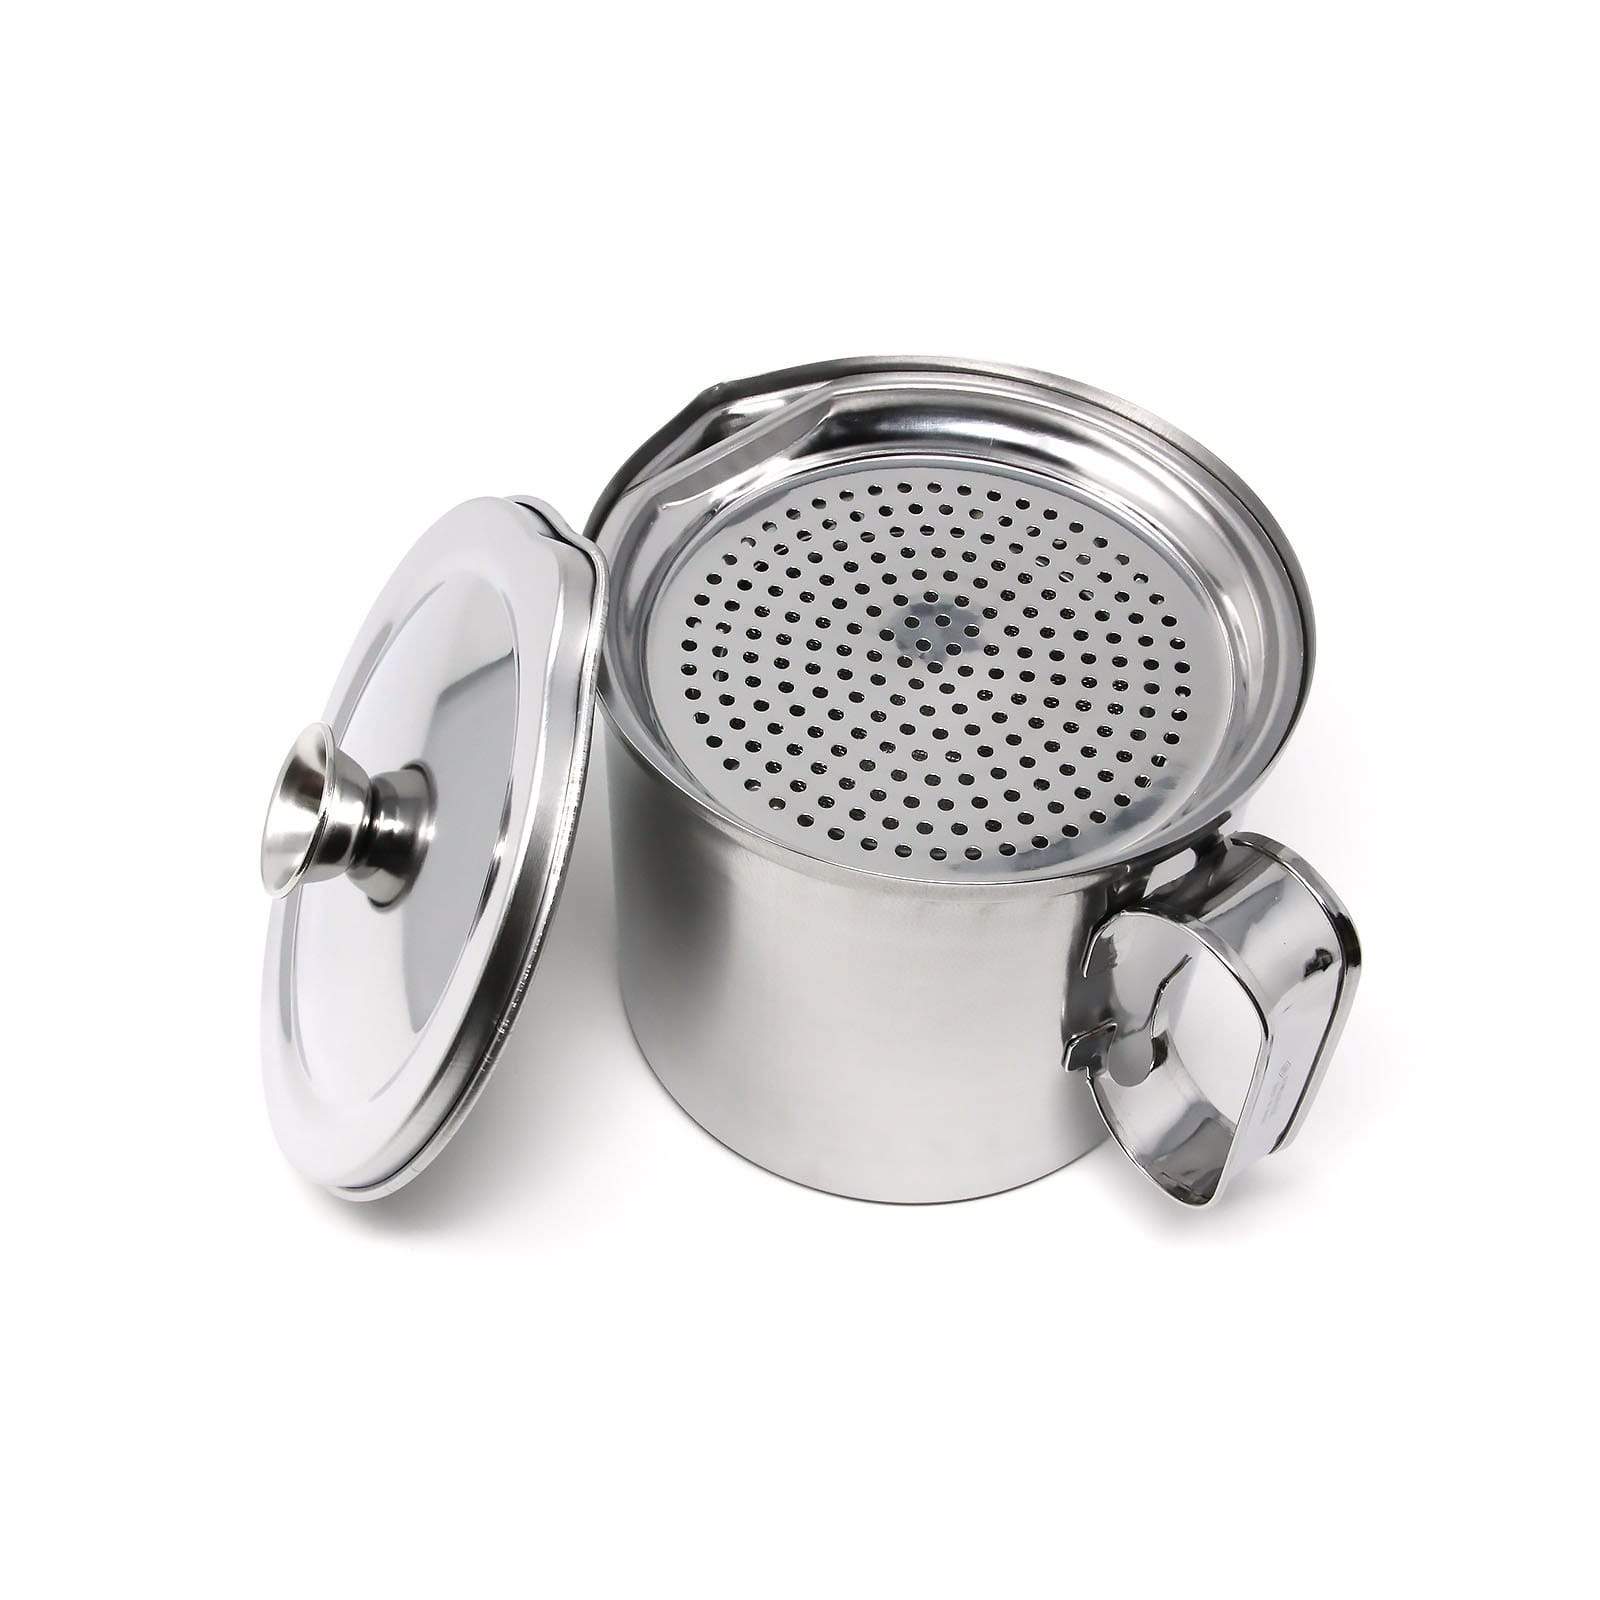 https://cdn.shopify.com/s/files/1/1610/3863/products/ichibishi-stainless-steel-cooking-oil-keeper-with-double-filter-strainer-1-2l-oil-storage-containers-6926291238995_2000x.jpg?v=1564104942